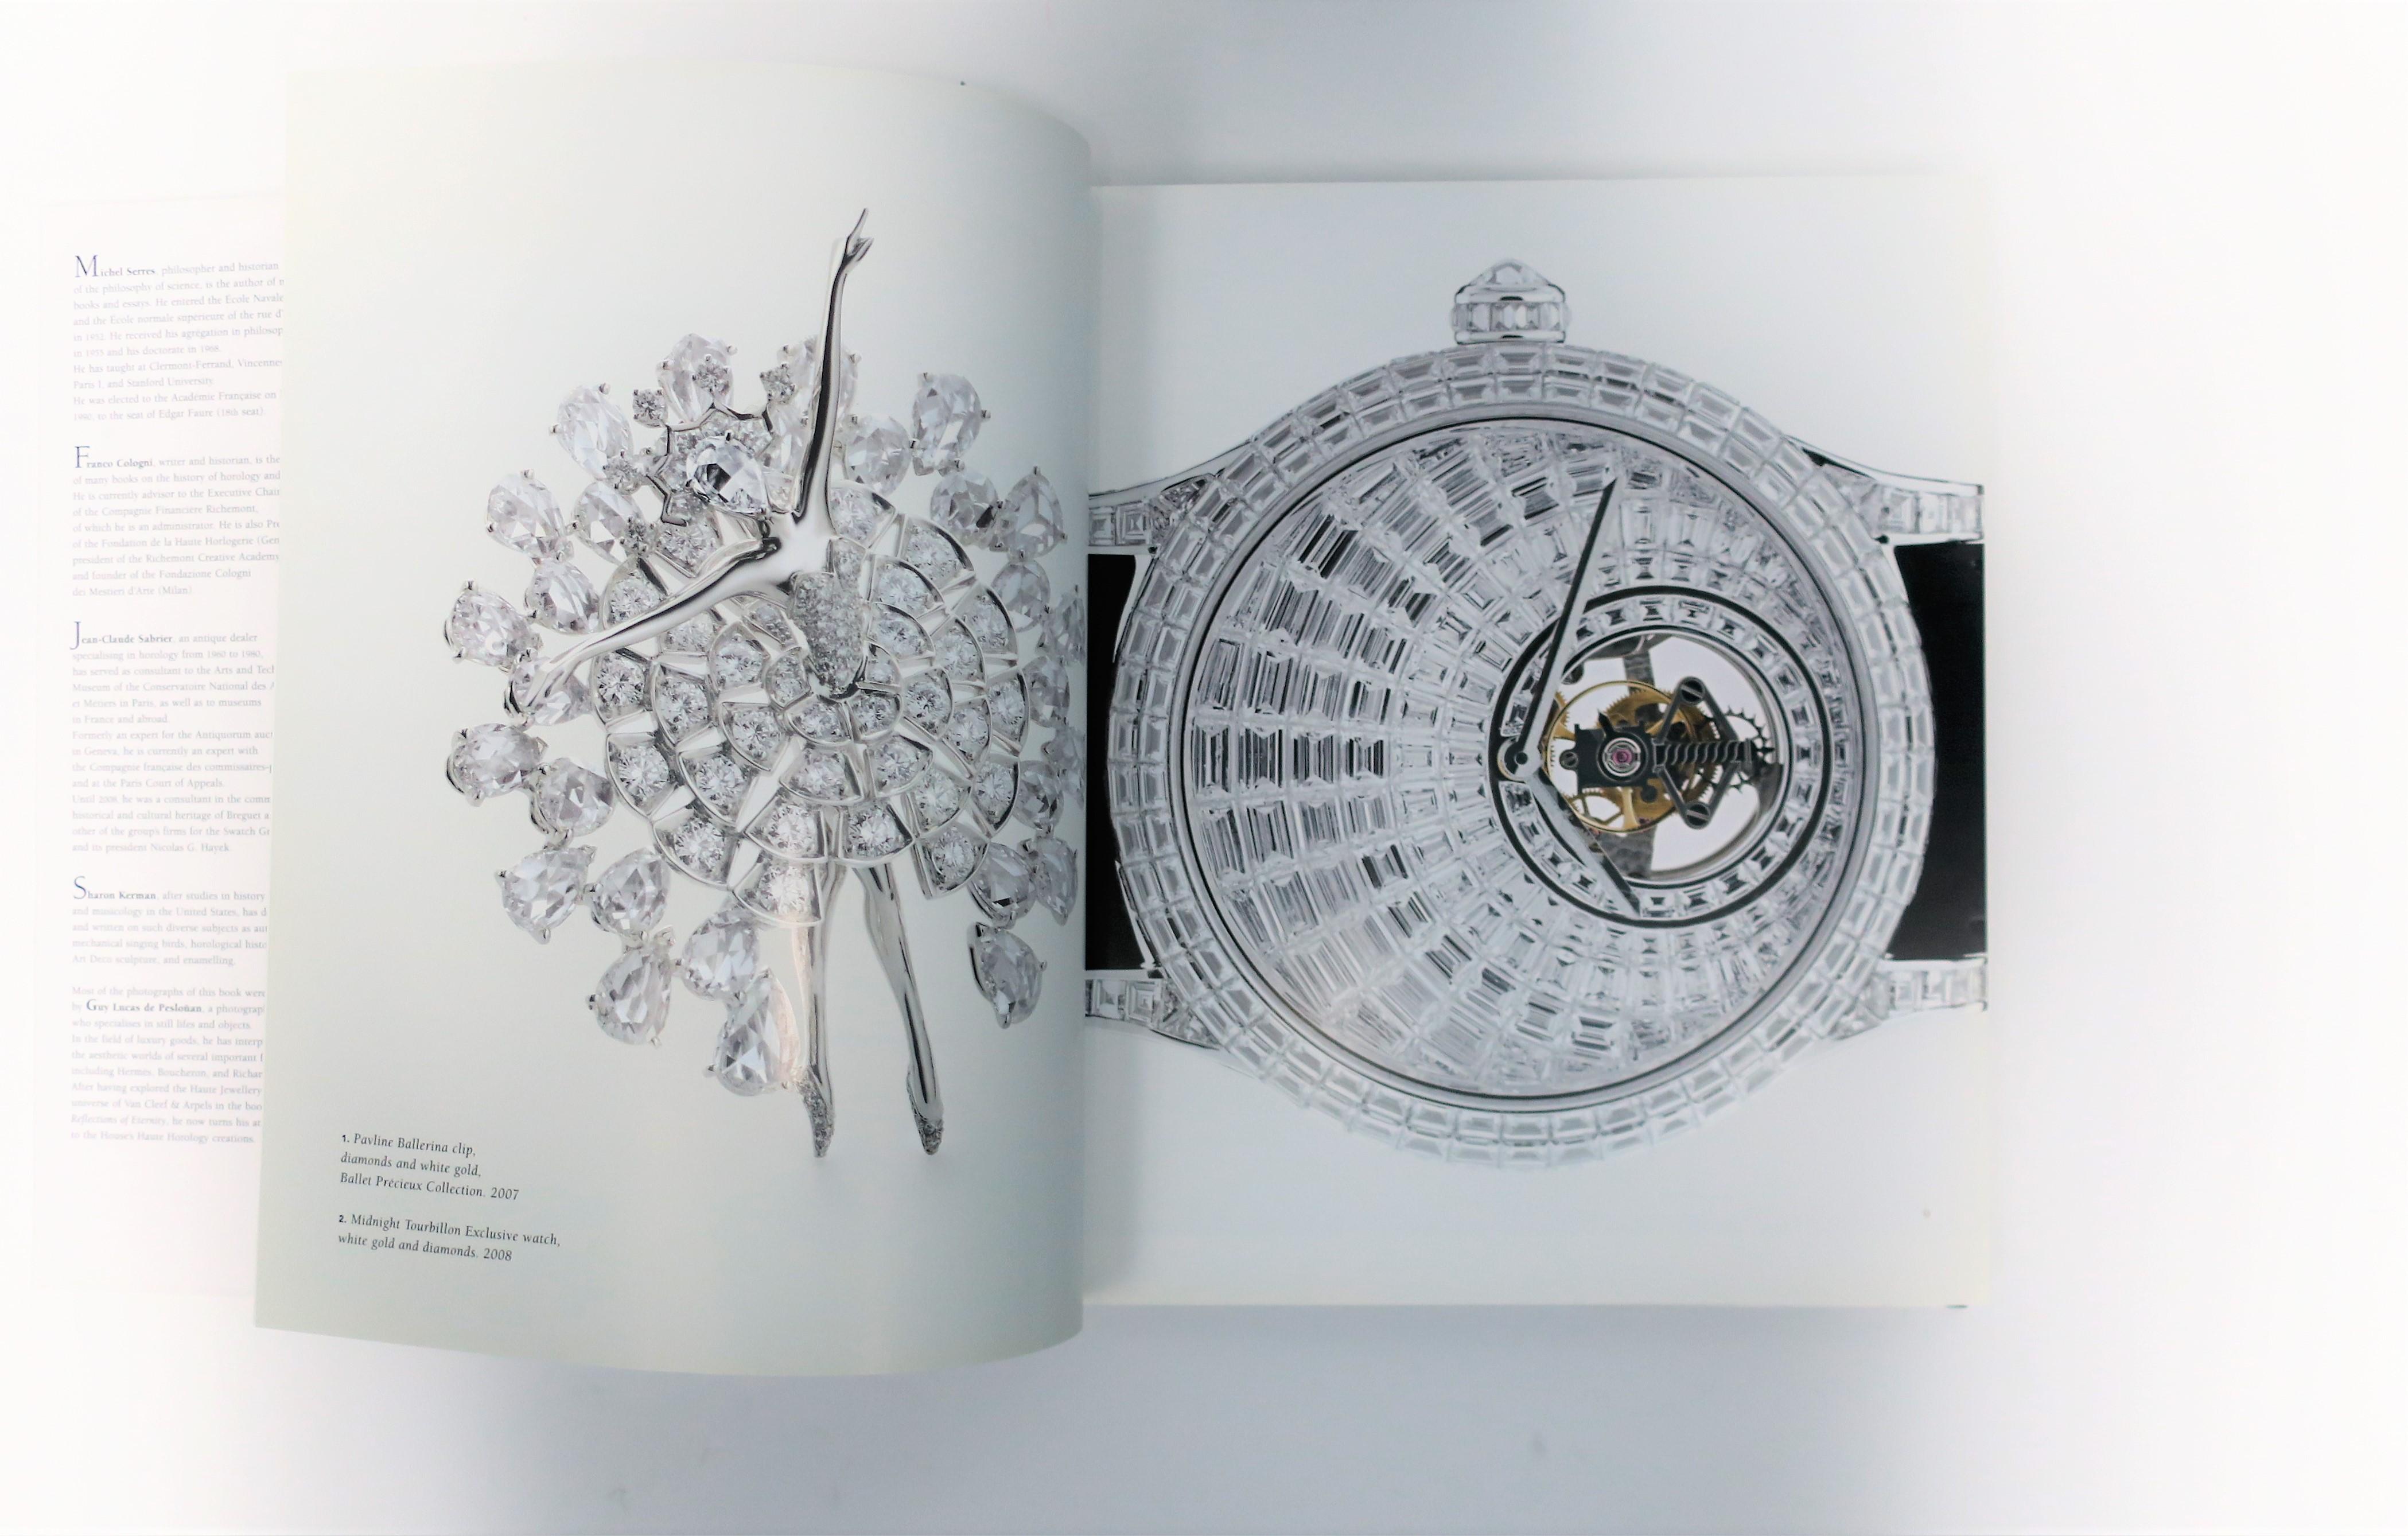 Van Cleef & Arpels, The Poetry of Time, Coffee Table or Library Book 2